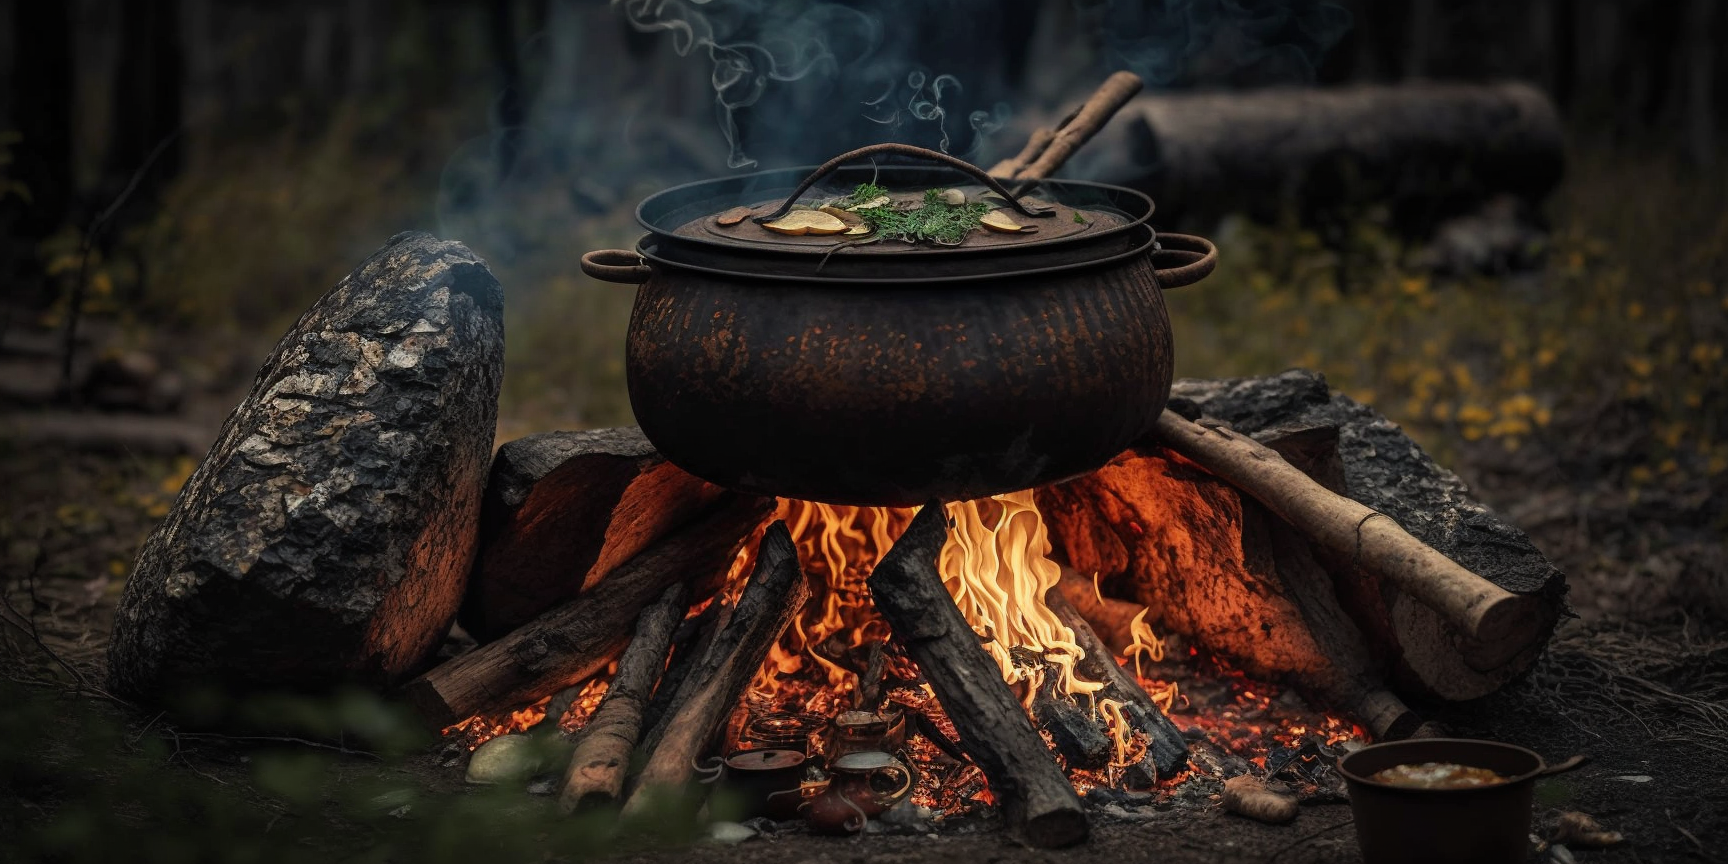 How to Cook with Limited Resources in a Survival Situation